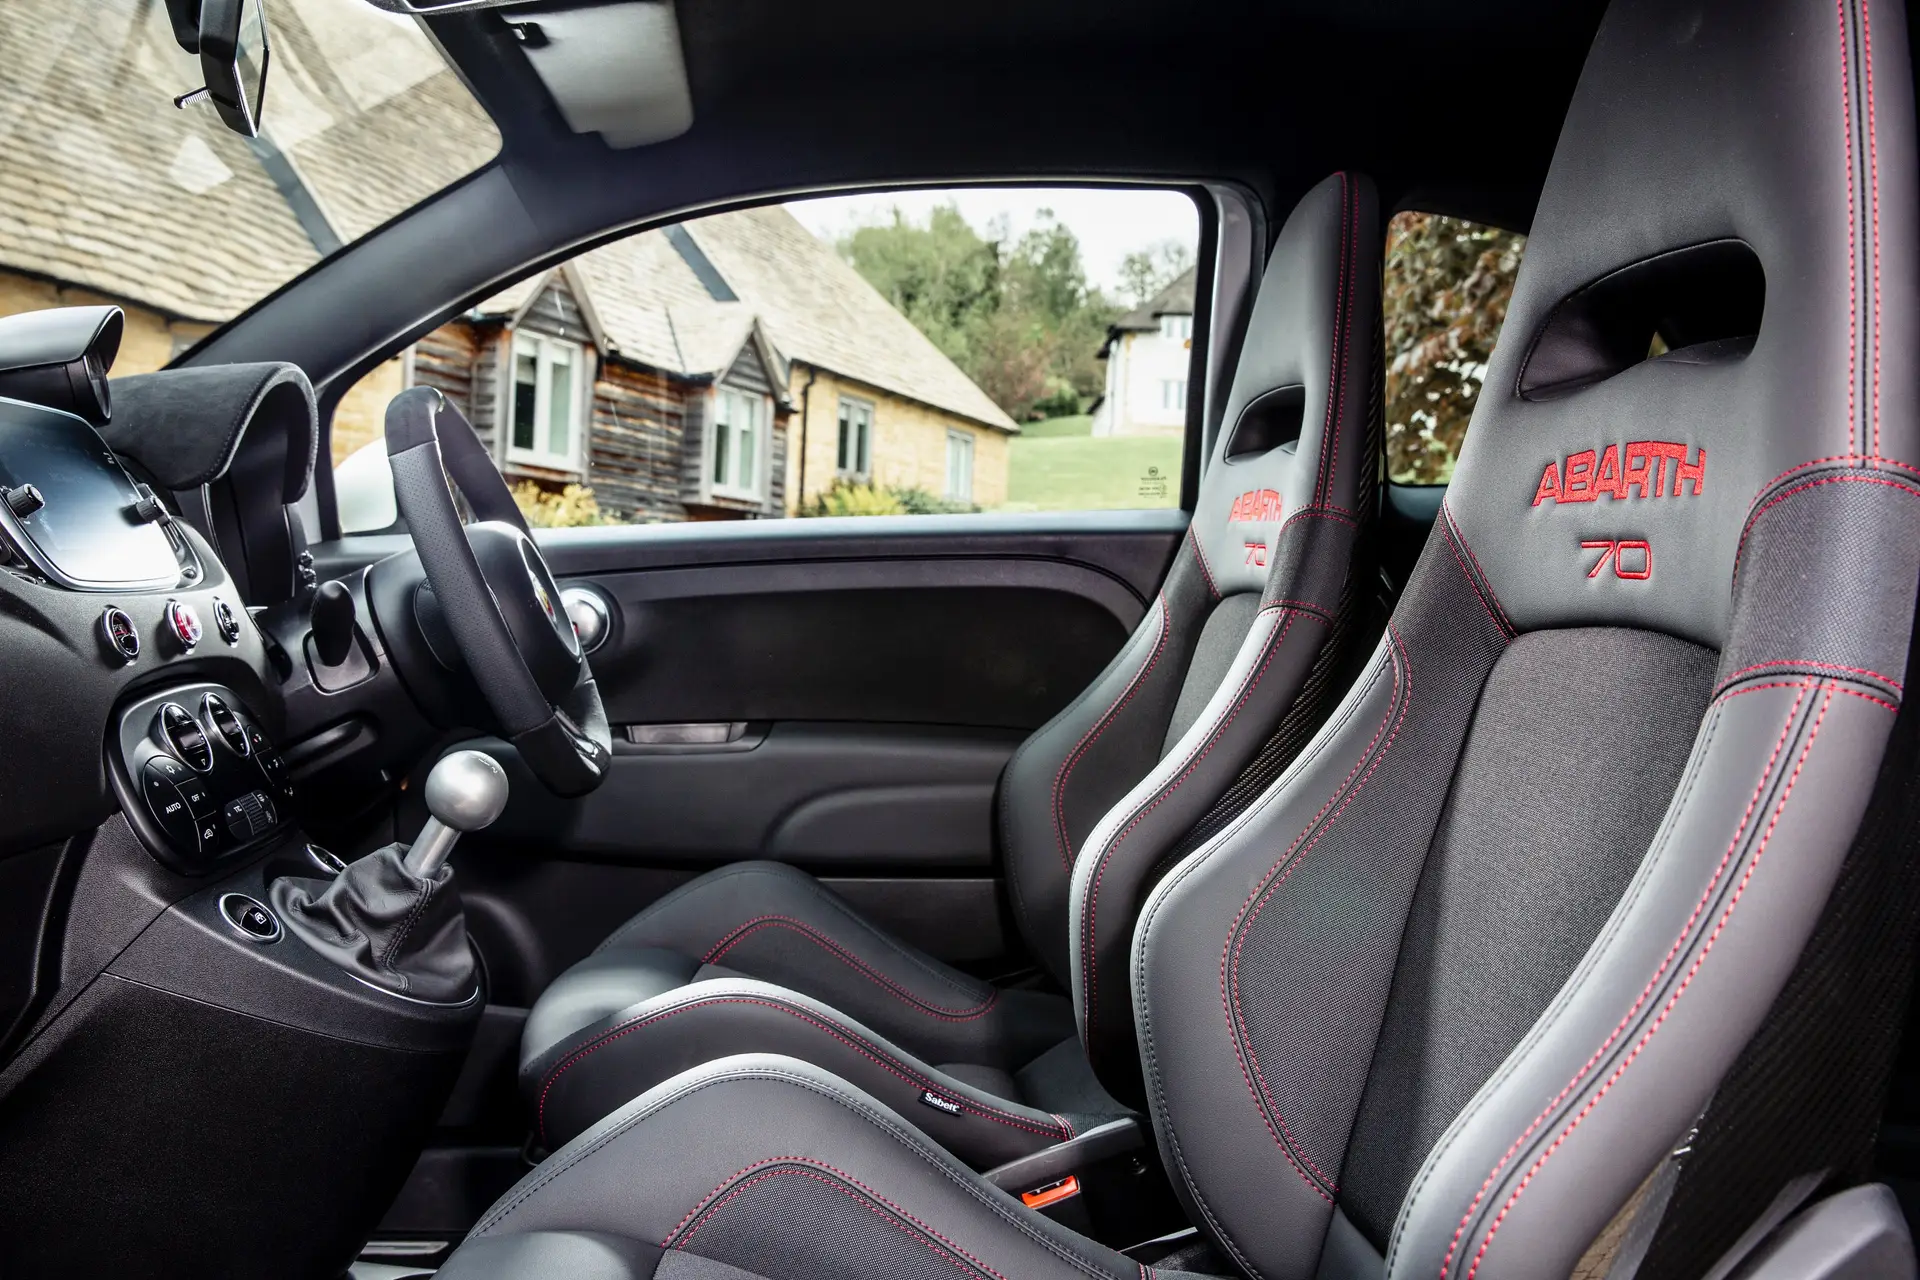 Abarth 595 Review 2023: Interior